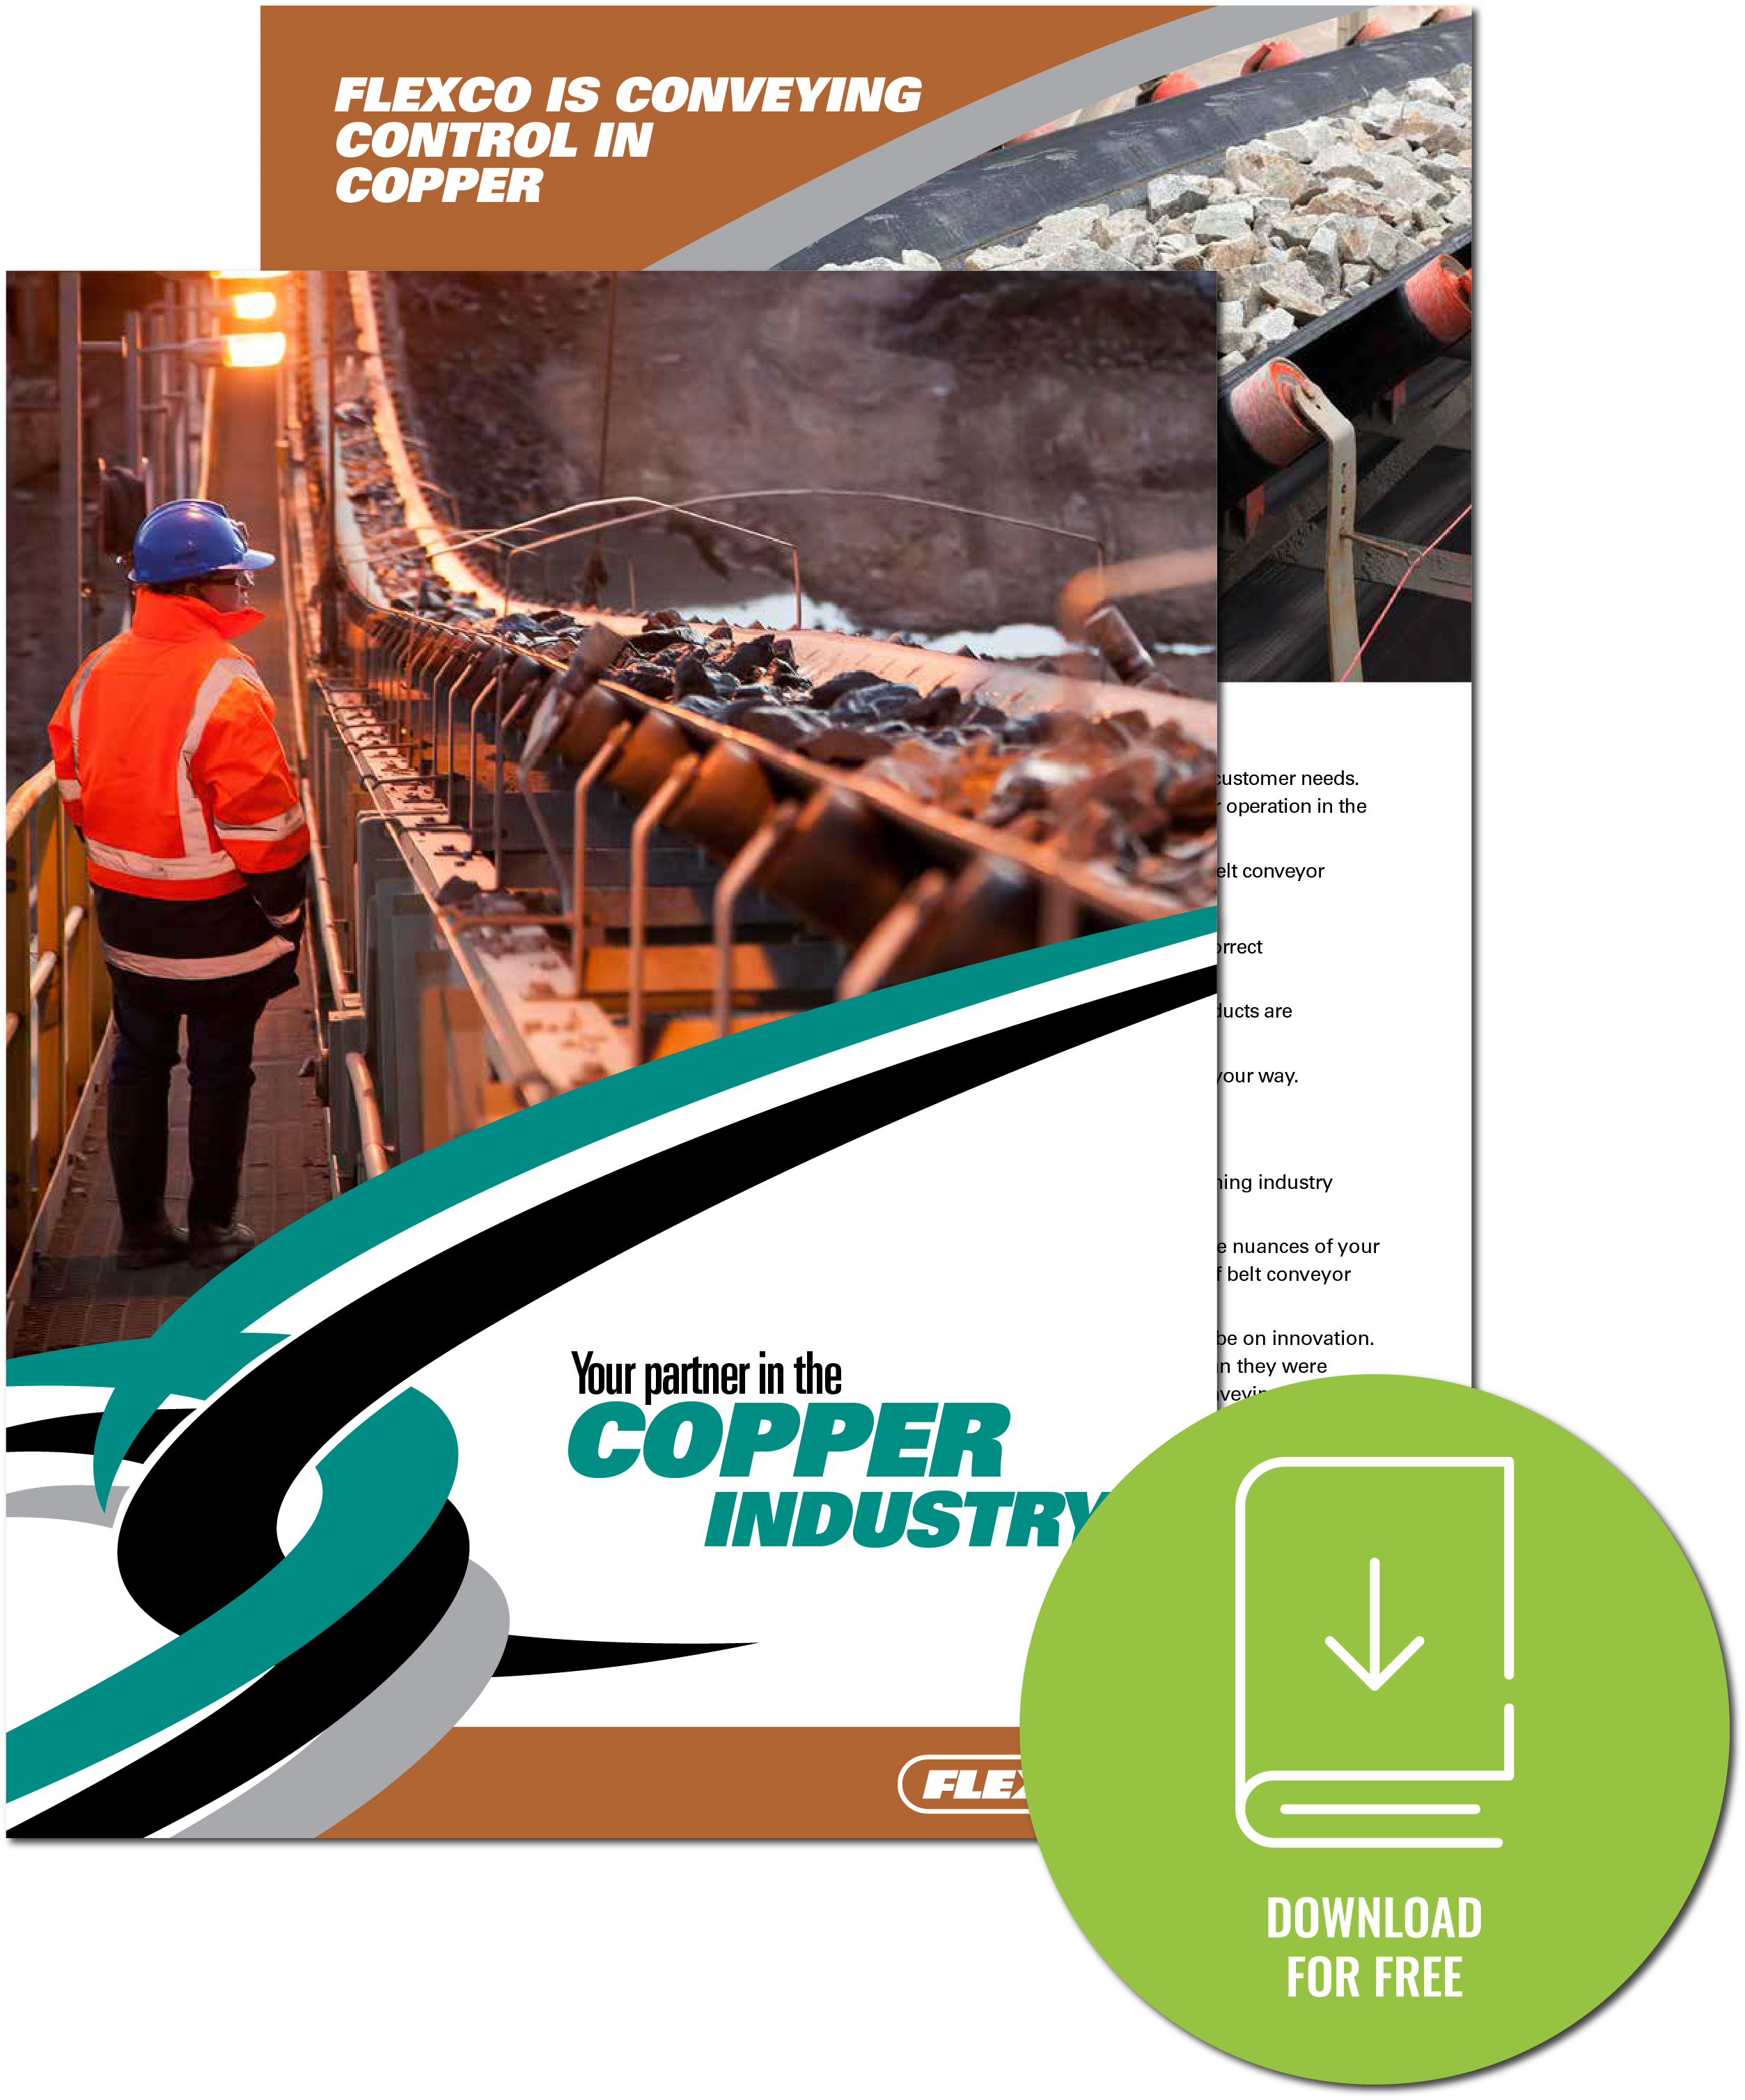 Your Partner in the copper industry flexco. Flexco is conveying control in copper - get the full eBook